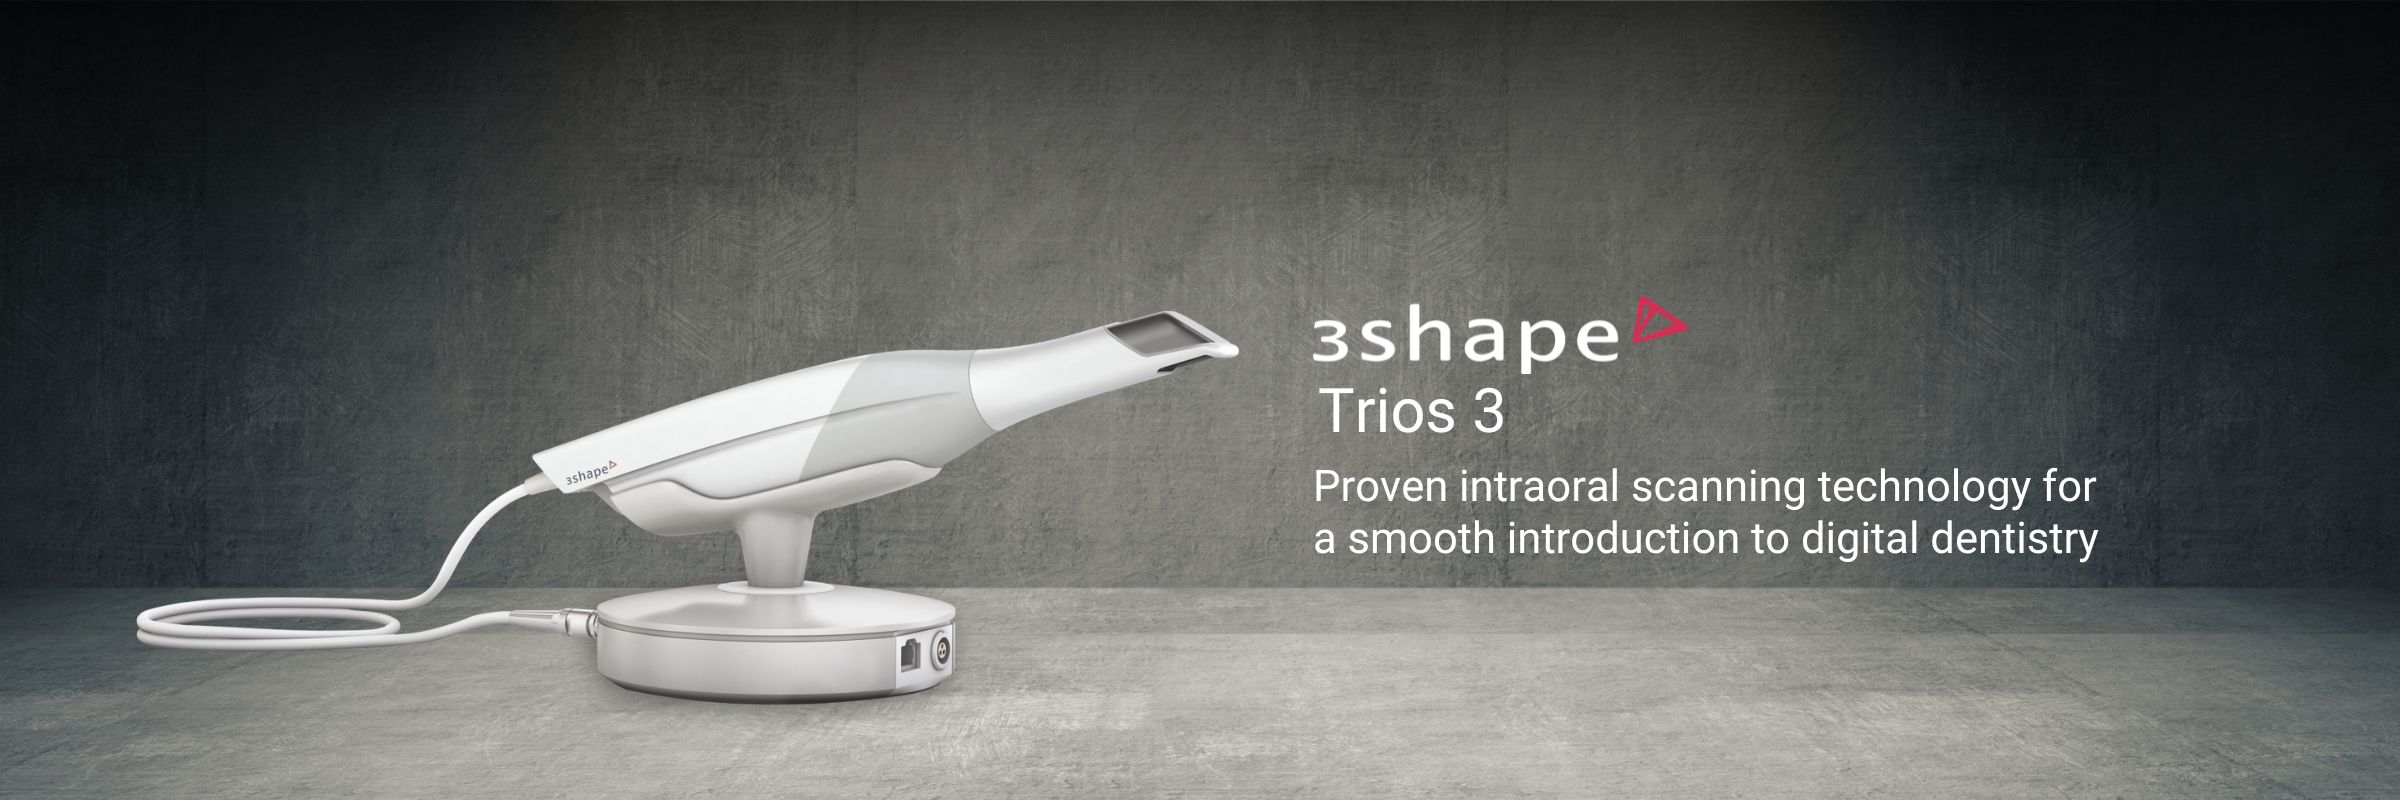 Trios 3 Intraoral Scanner Product Banner